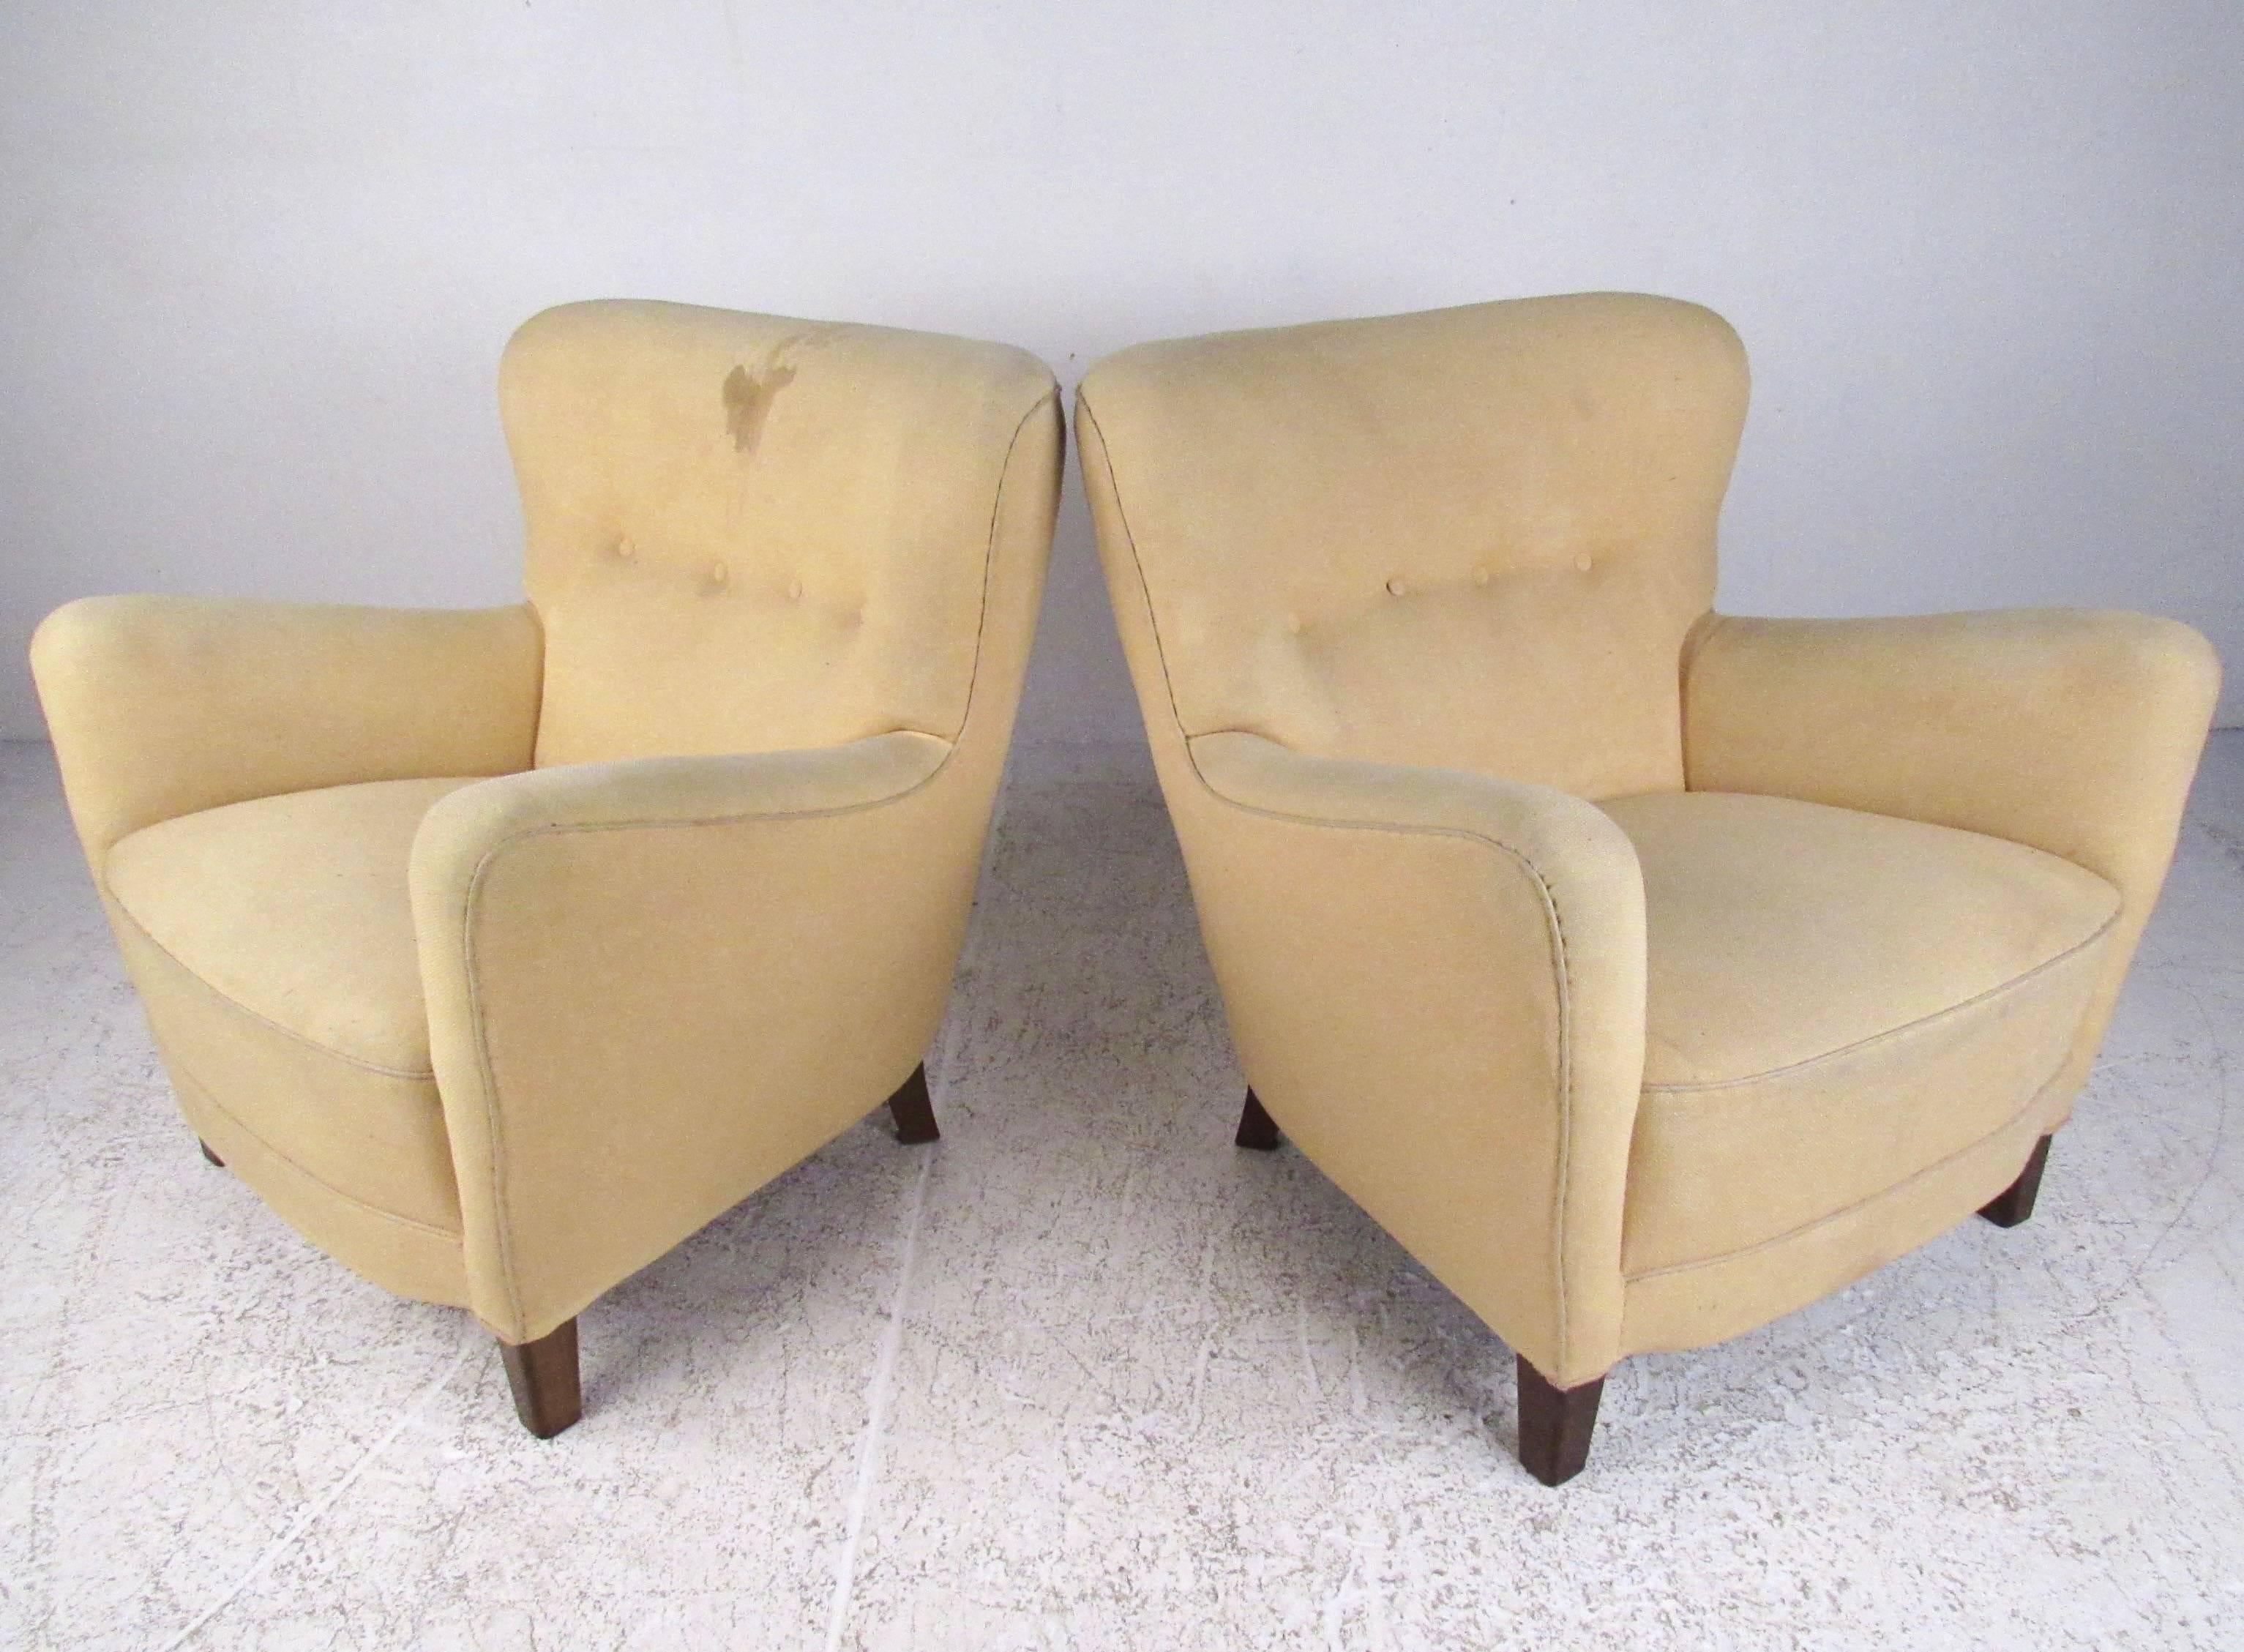 This stylish pair of shapely club chairs feature tufted upholstery make a comfortable addition to any seating area. The vintage appeal of this deco style pair makes for a warm and impressive addition to home or business seating. Please confirm item